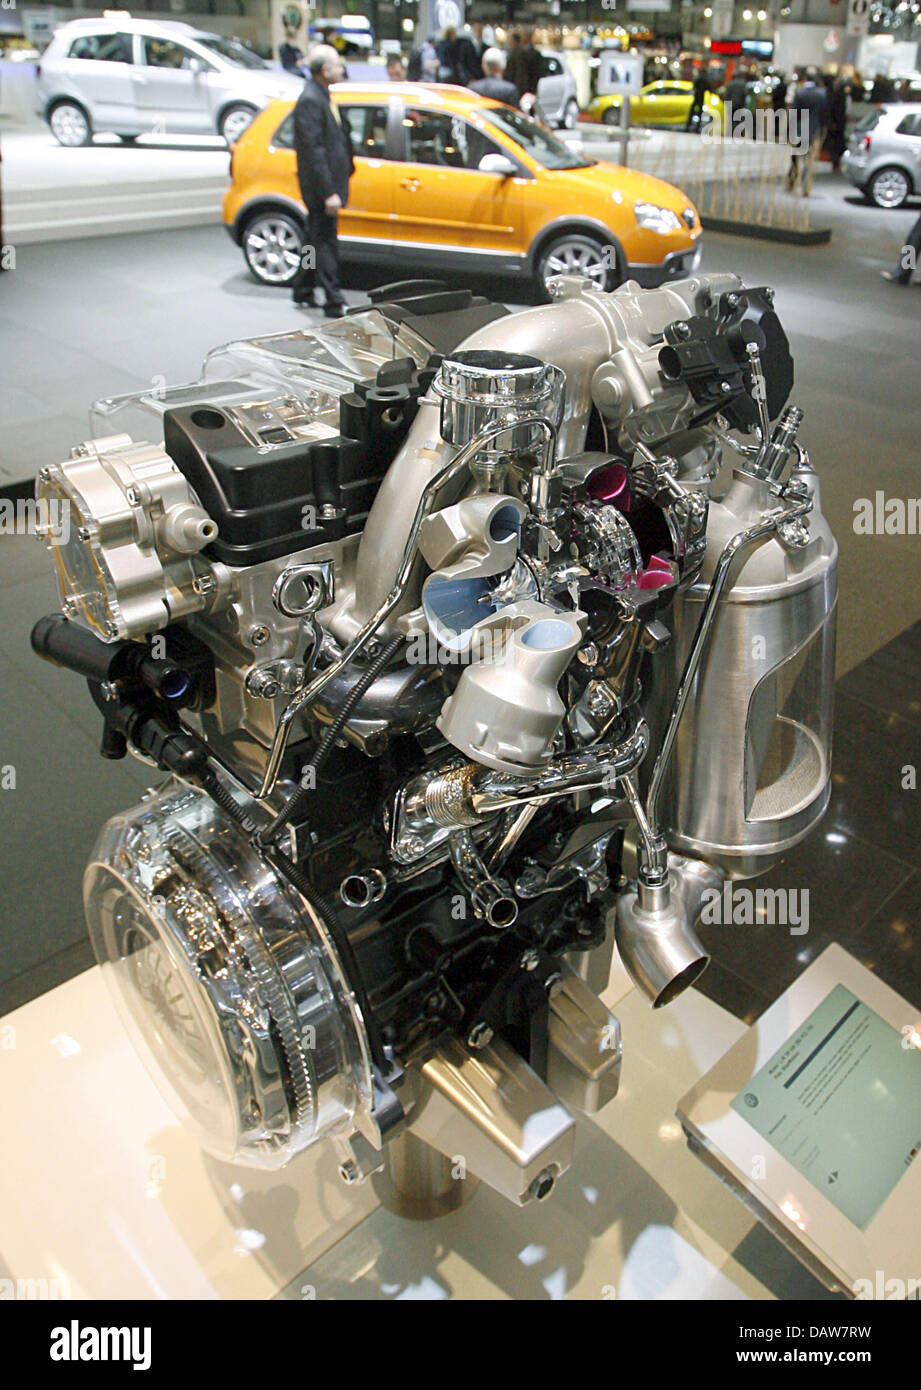 A VW Polo BlueMotion 1.4 TDI 59 kW engine is pictured at the 77th  International Motor Show in Geneva, Switzerland, Wednesday 07 March 2007.  The 77th International Geneva Motor Show runs from